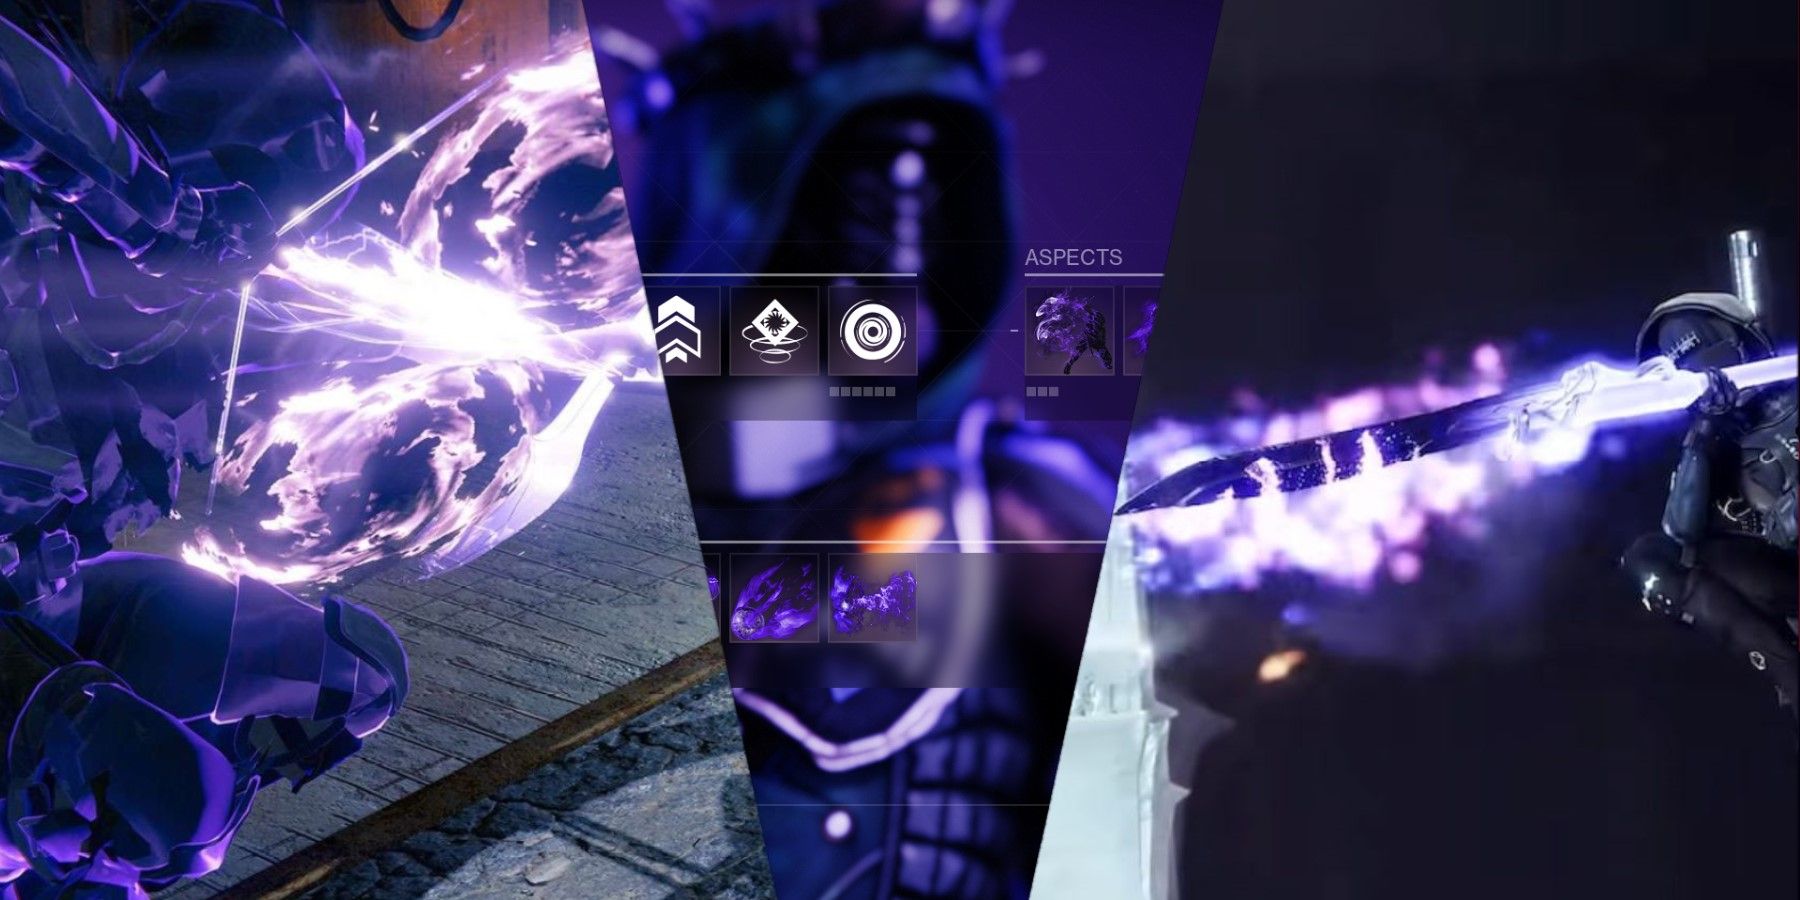 destiny 2 the witch queen expansion void 3.0 update best void hunter builds tips exotic items aspect fragments mods combos solo group play pvp